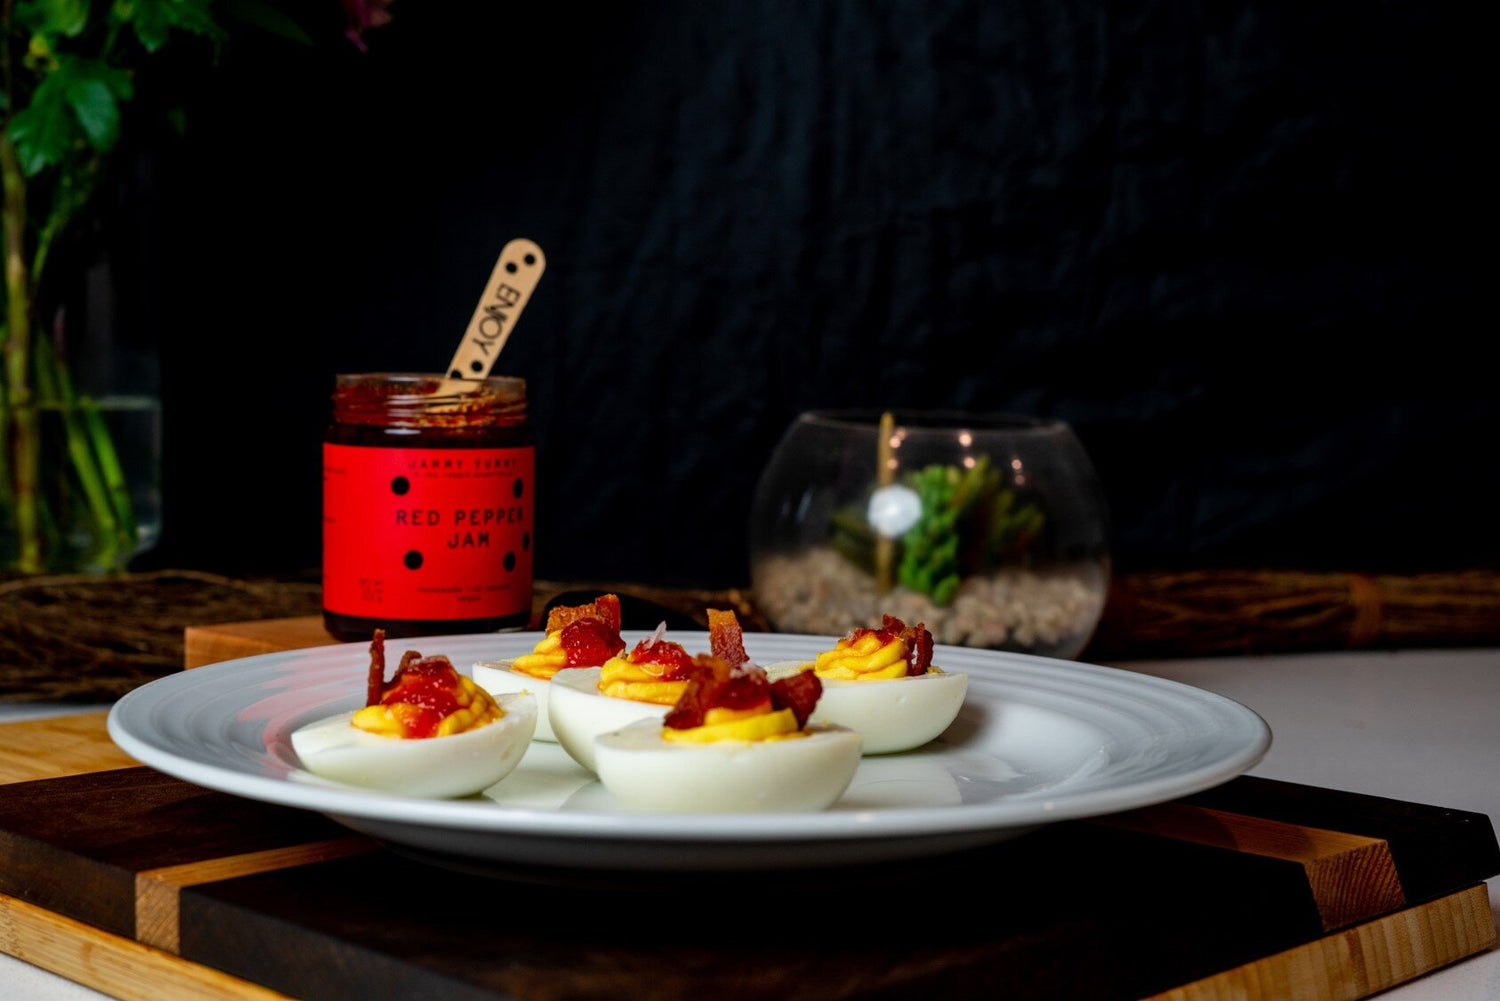 Deviled Eggs with Bacon and Red Pepper Jam